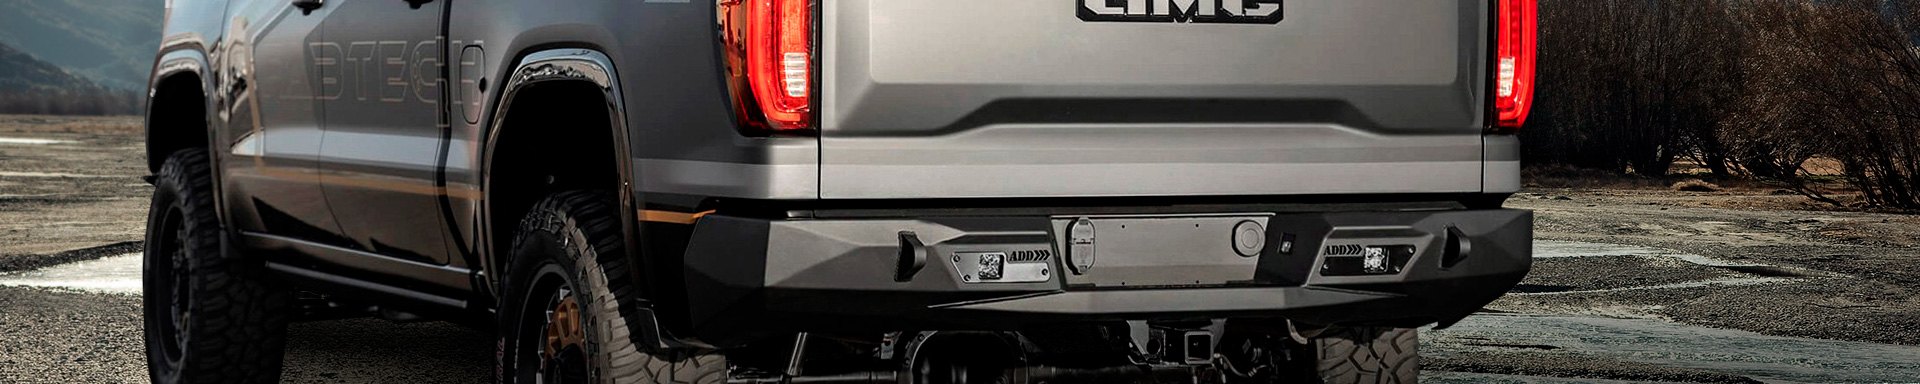 Provide Your ‘20 Sierra With Finished Look With ADD New Hammer Rear HD Bumper